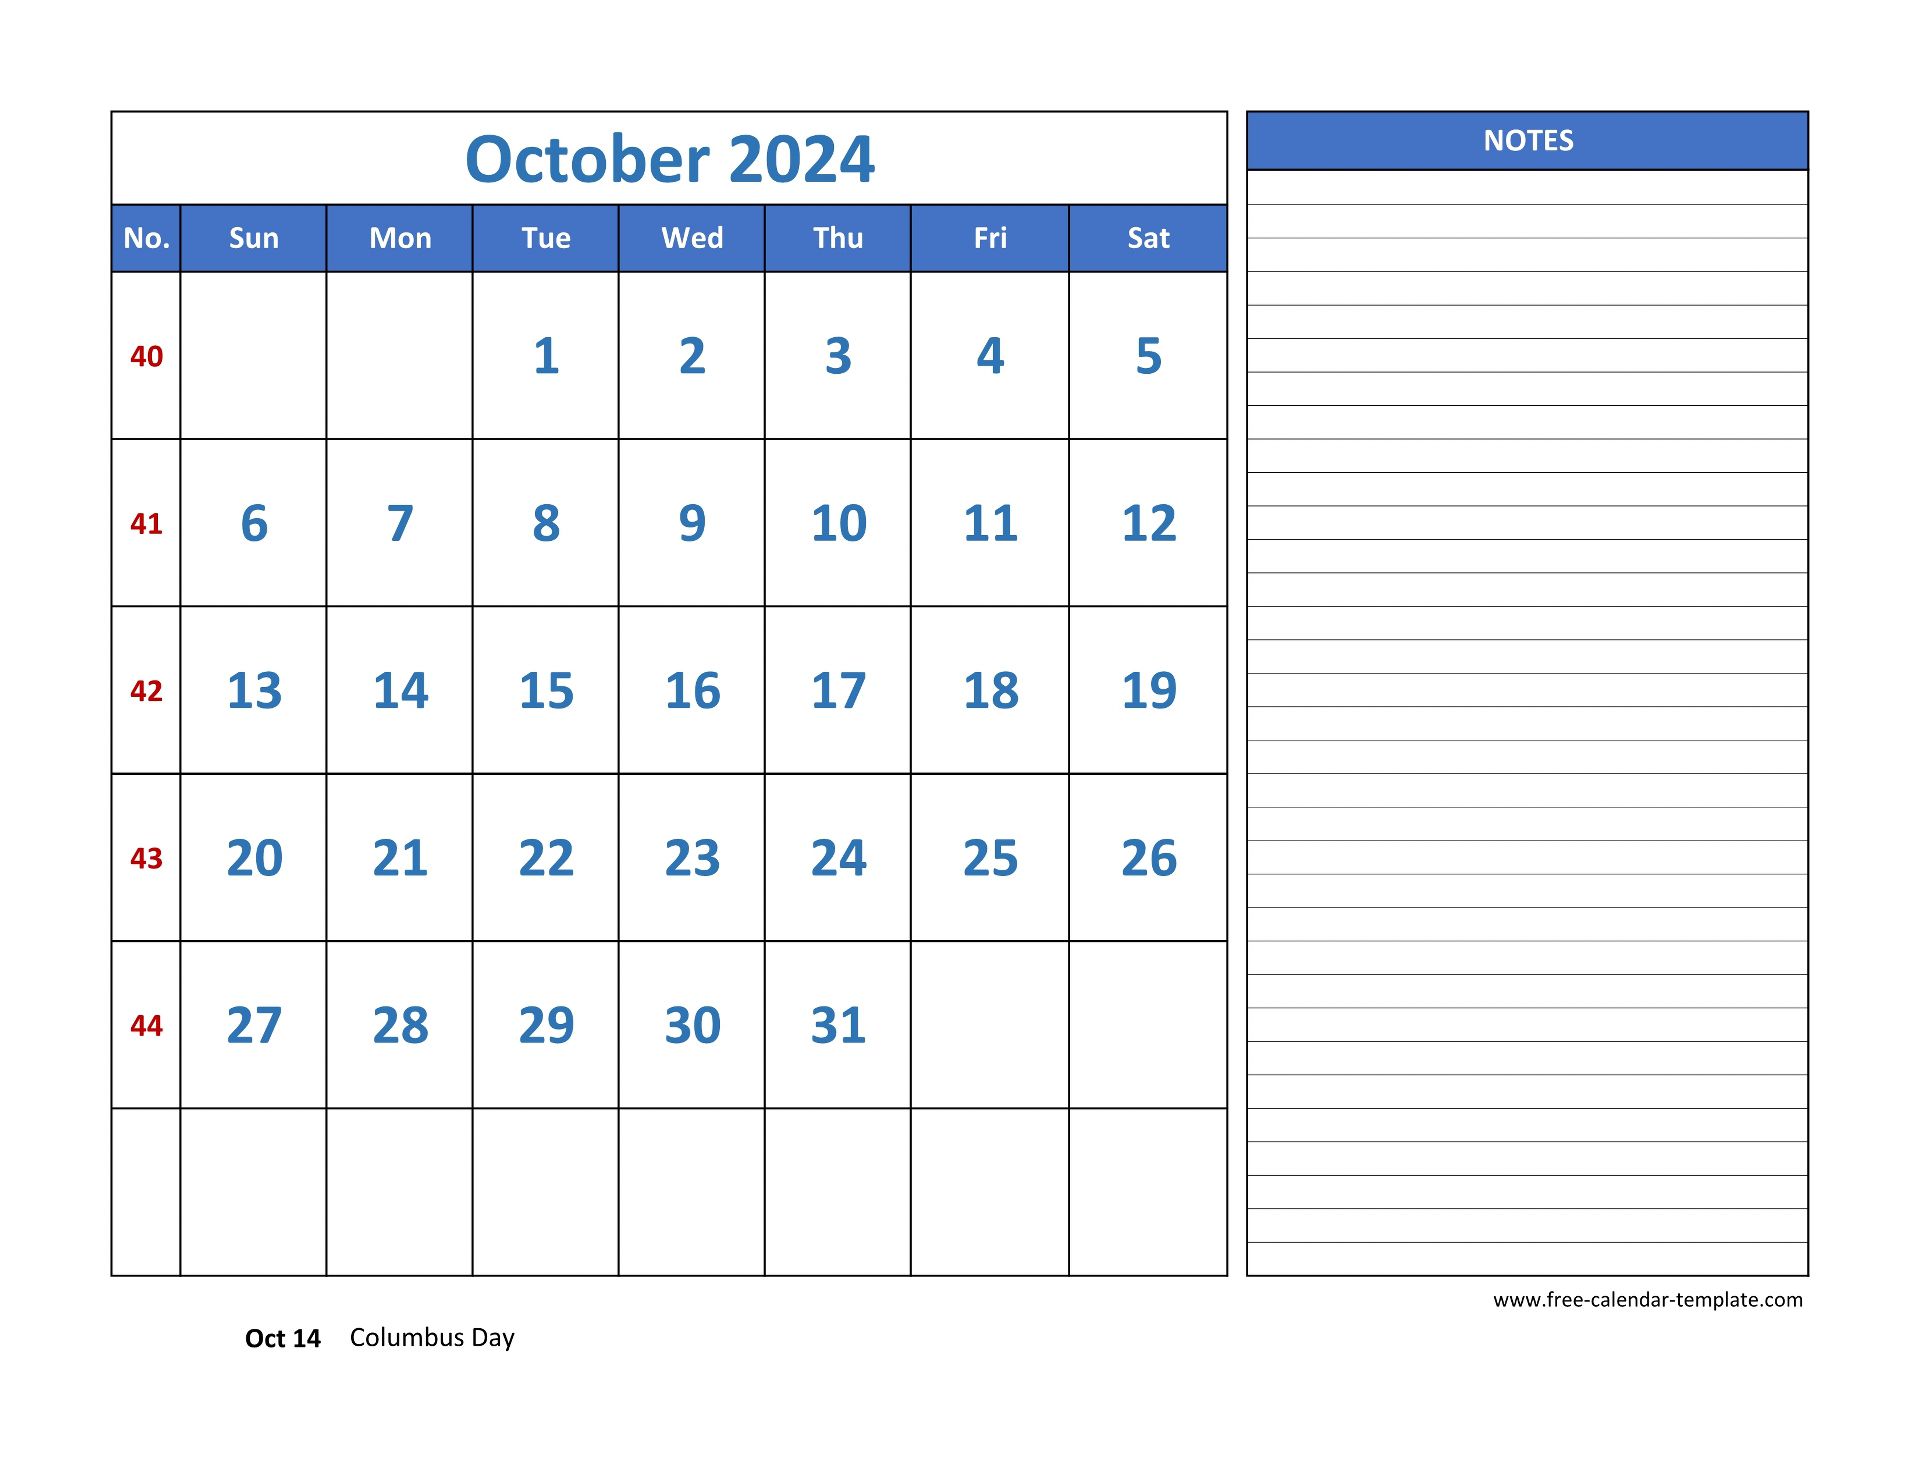 October Calendar 2024 grid lines for holidays and notes (horizontal